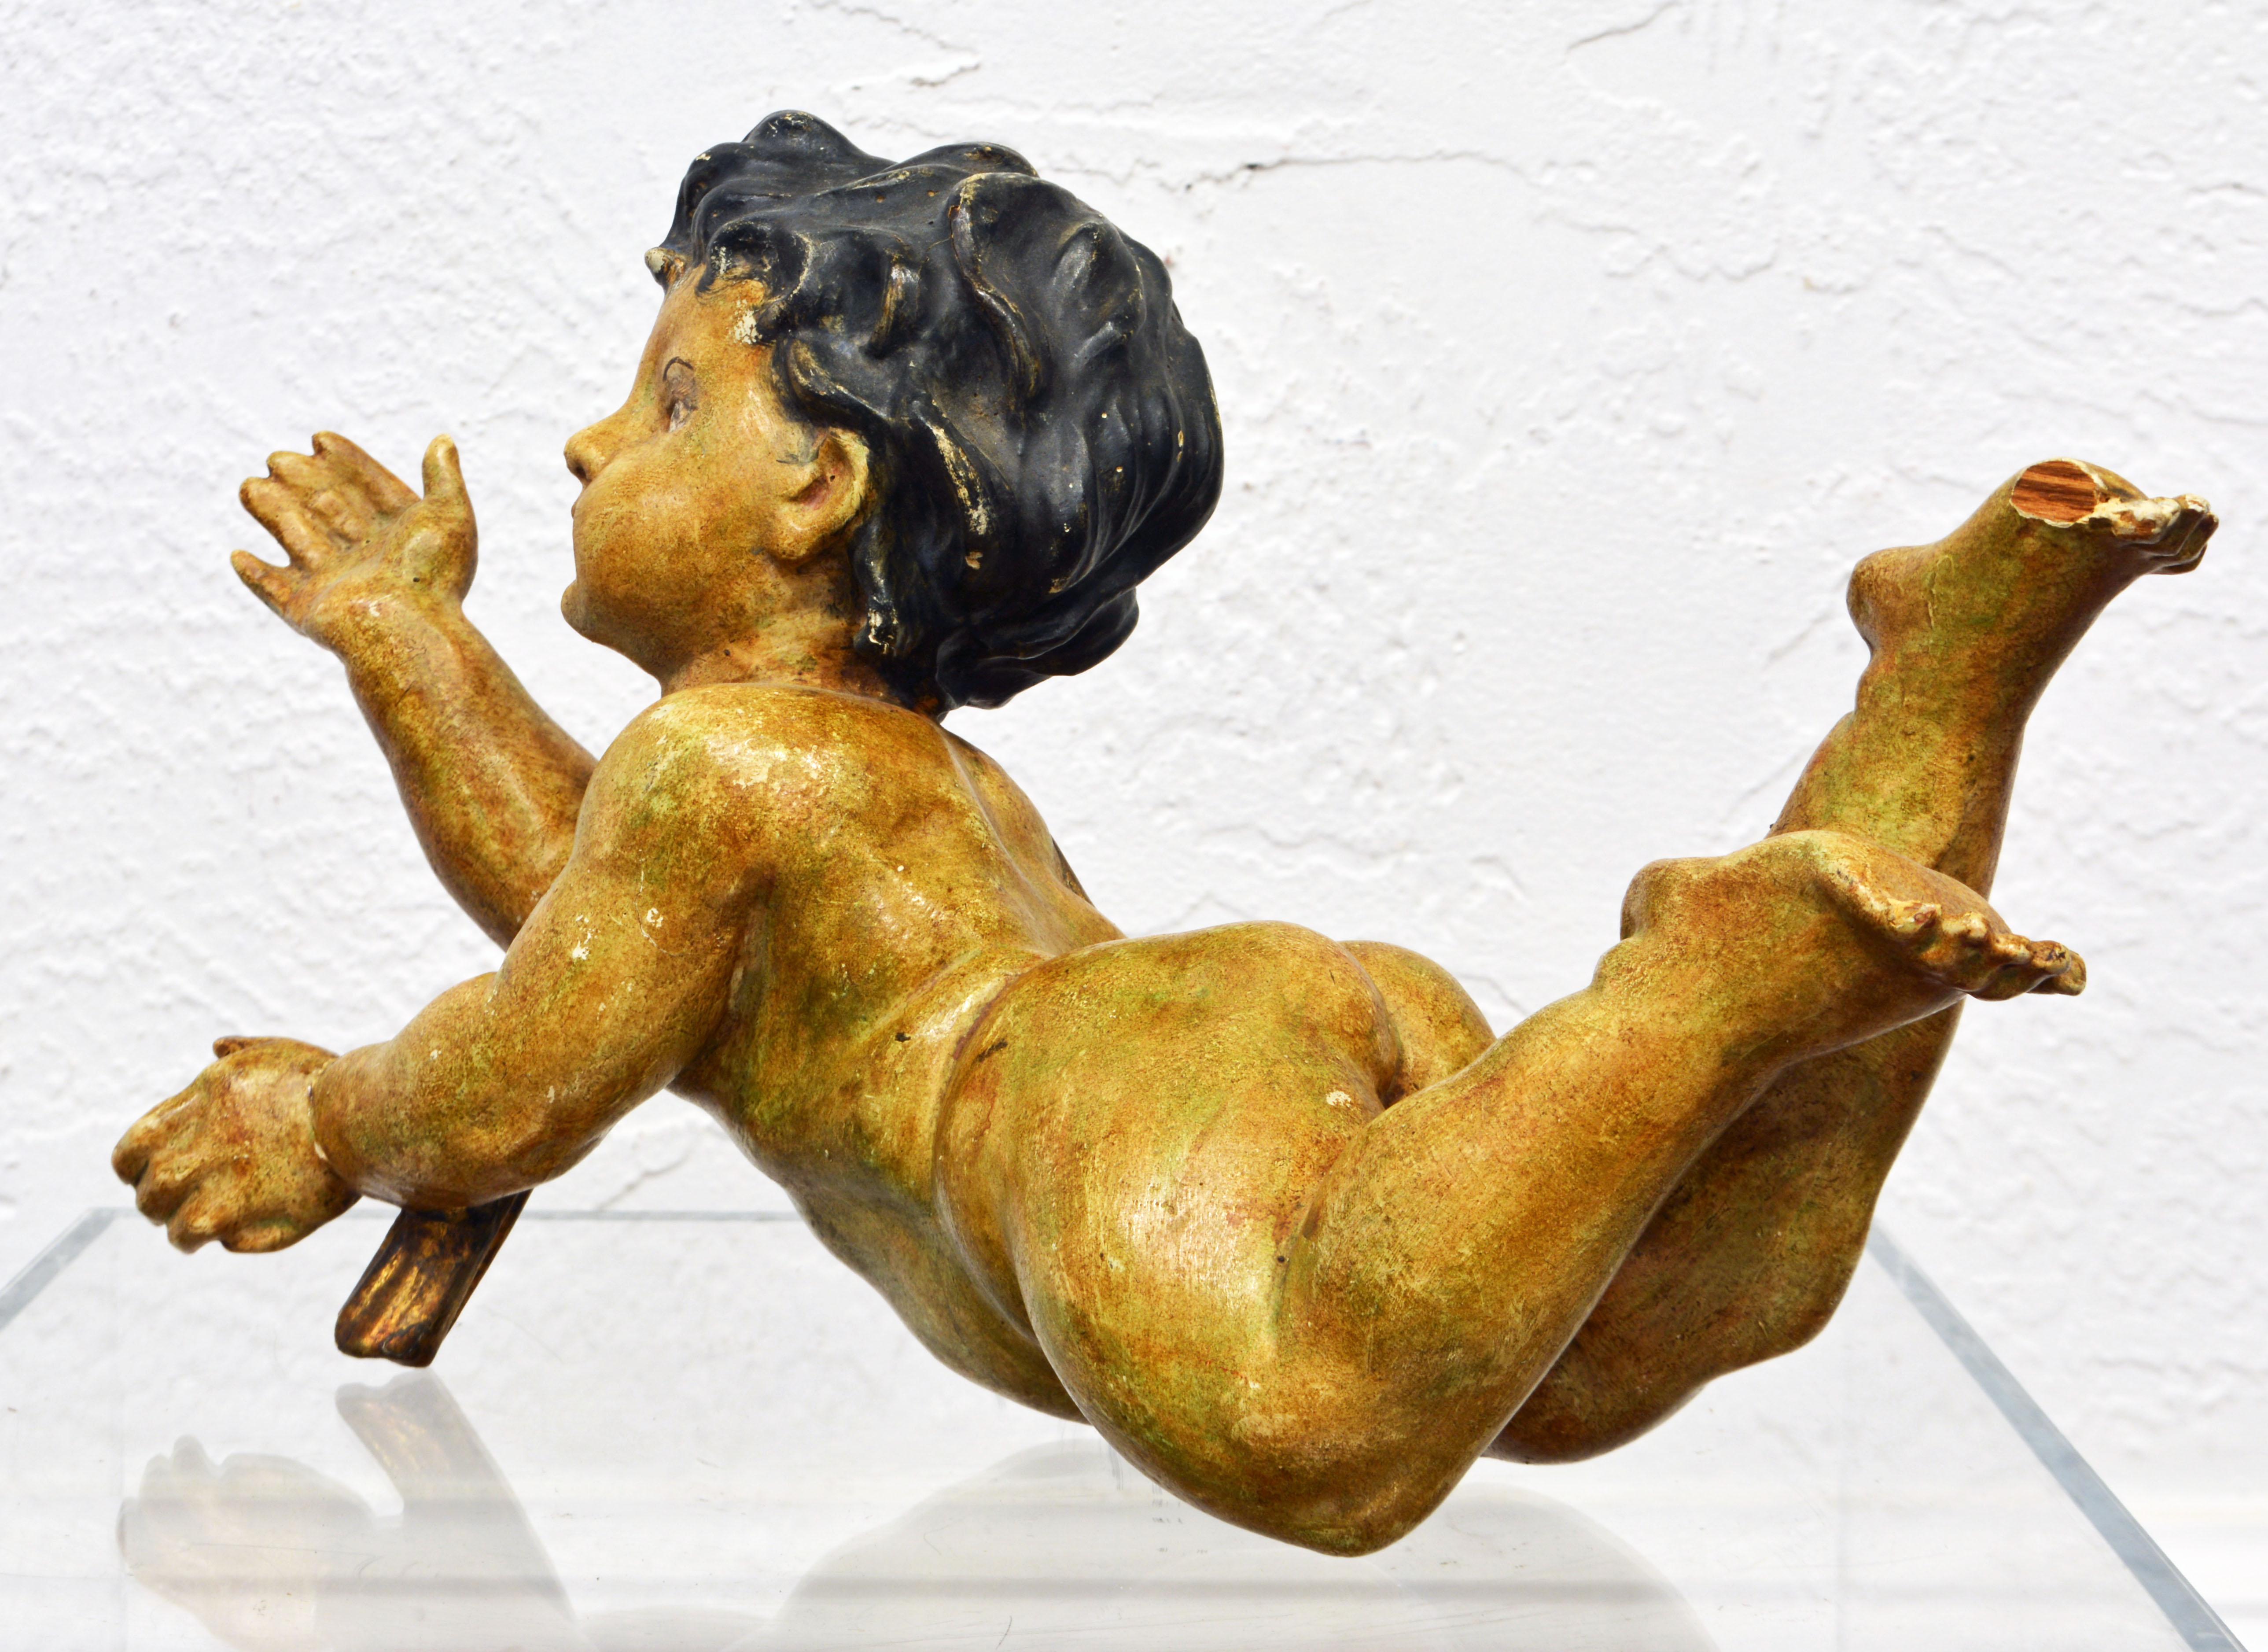 This fine Italian 19th century carved putti figure is well proportioned and detailed. The surface is partly gilt with a painted gold tinted body and dark painted hair.